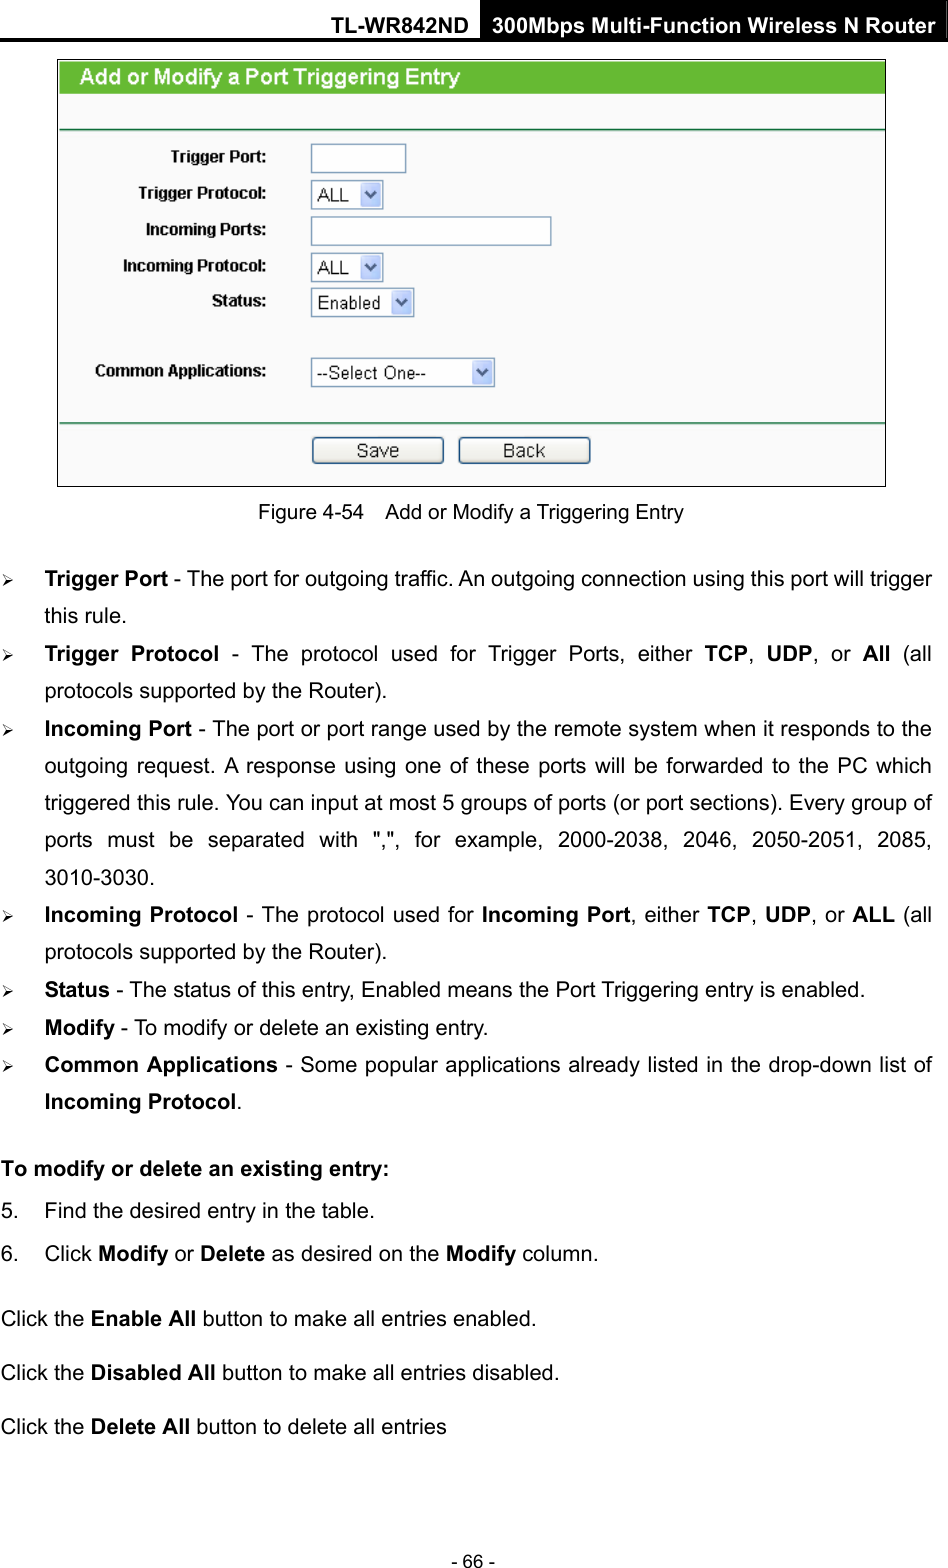 TL-WR842ND 300Mbps Multi-Function Wireless N Router - 66 -  Figure 4-54    Add or Modify a Triggering Entry ¾ Trigger Port - The port for outgoing traffic. An outgoing connection using this port will trigger this rule.   ¾ Trigger Protocol - The protocol used for Trigger Ports, either TCP,  UDP, or All  (all protocols supported by the Router).   ¾ Incoming Port - The port or port range used by the remote system when it responds to the outgoing request. A response using one of these ports will be forwarded to the PC which triggered this rule. You can input at most 5 groups of ports (or port sections). Every group of ports must be separated with &quot;,&quot;, for example, 2000-2038, 2046, 2050-2051, 2085, 3010-3030.  ¾ Incoming Protocol - The protocol used for Incoming Port, either TCP, UDP, or ALL (all protocols supported by the Router).   ¾ Status - The status of this entry, Enabled means the Port Triggering entry is enabled.   ¾ Modify - To modify or delete an existing entry.   ¾ Common Applications - Some popular applications already listed in the drop-down list of Incoming Protocol. To modify or delete an existing entry: 5.  Find the desired entry in the table.   6. Click Modify or Delete as desired on the Modify column.   Click the Enable All button to make all entries enabled. Click the Disabled All button to make all entries disabled. Click the Delete All button to delete all entries  